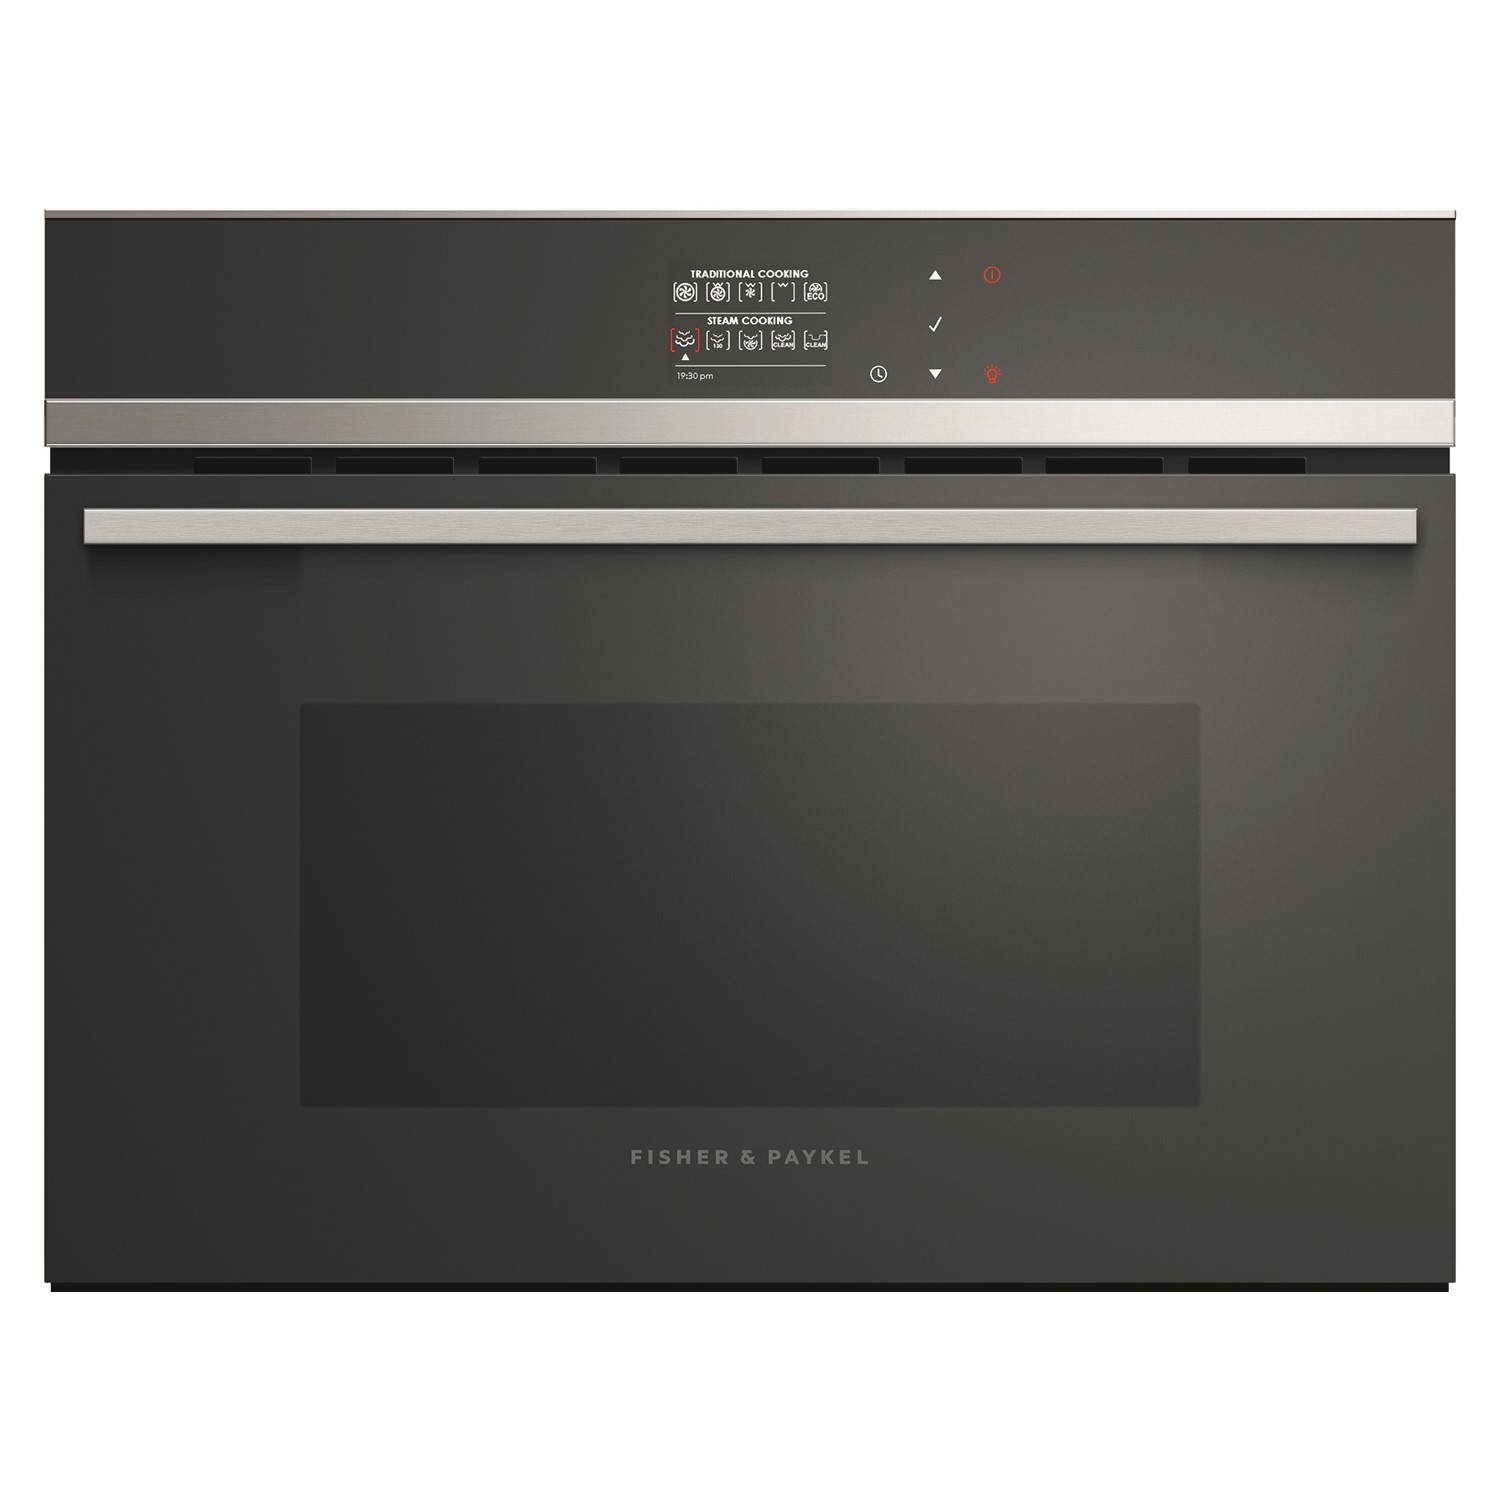 Fisher & Paykel Series 9 Built-in Steam Oven & Grill - Black Glass